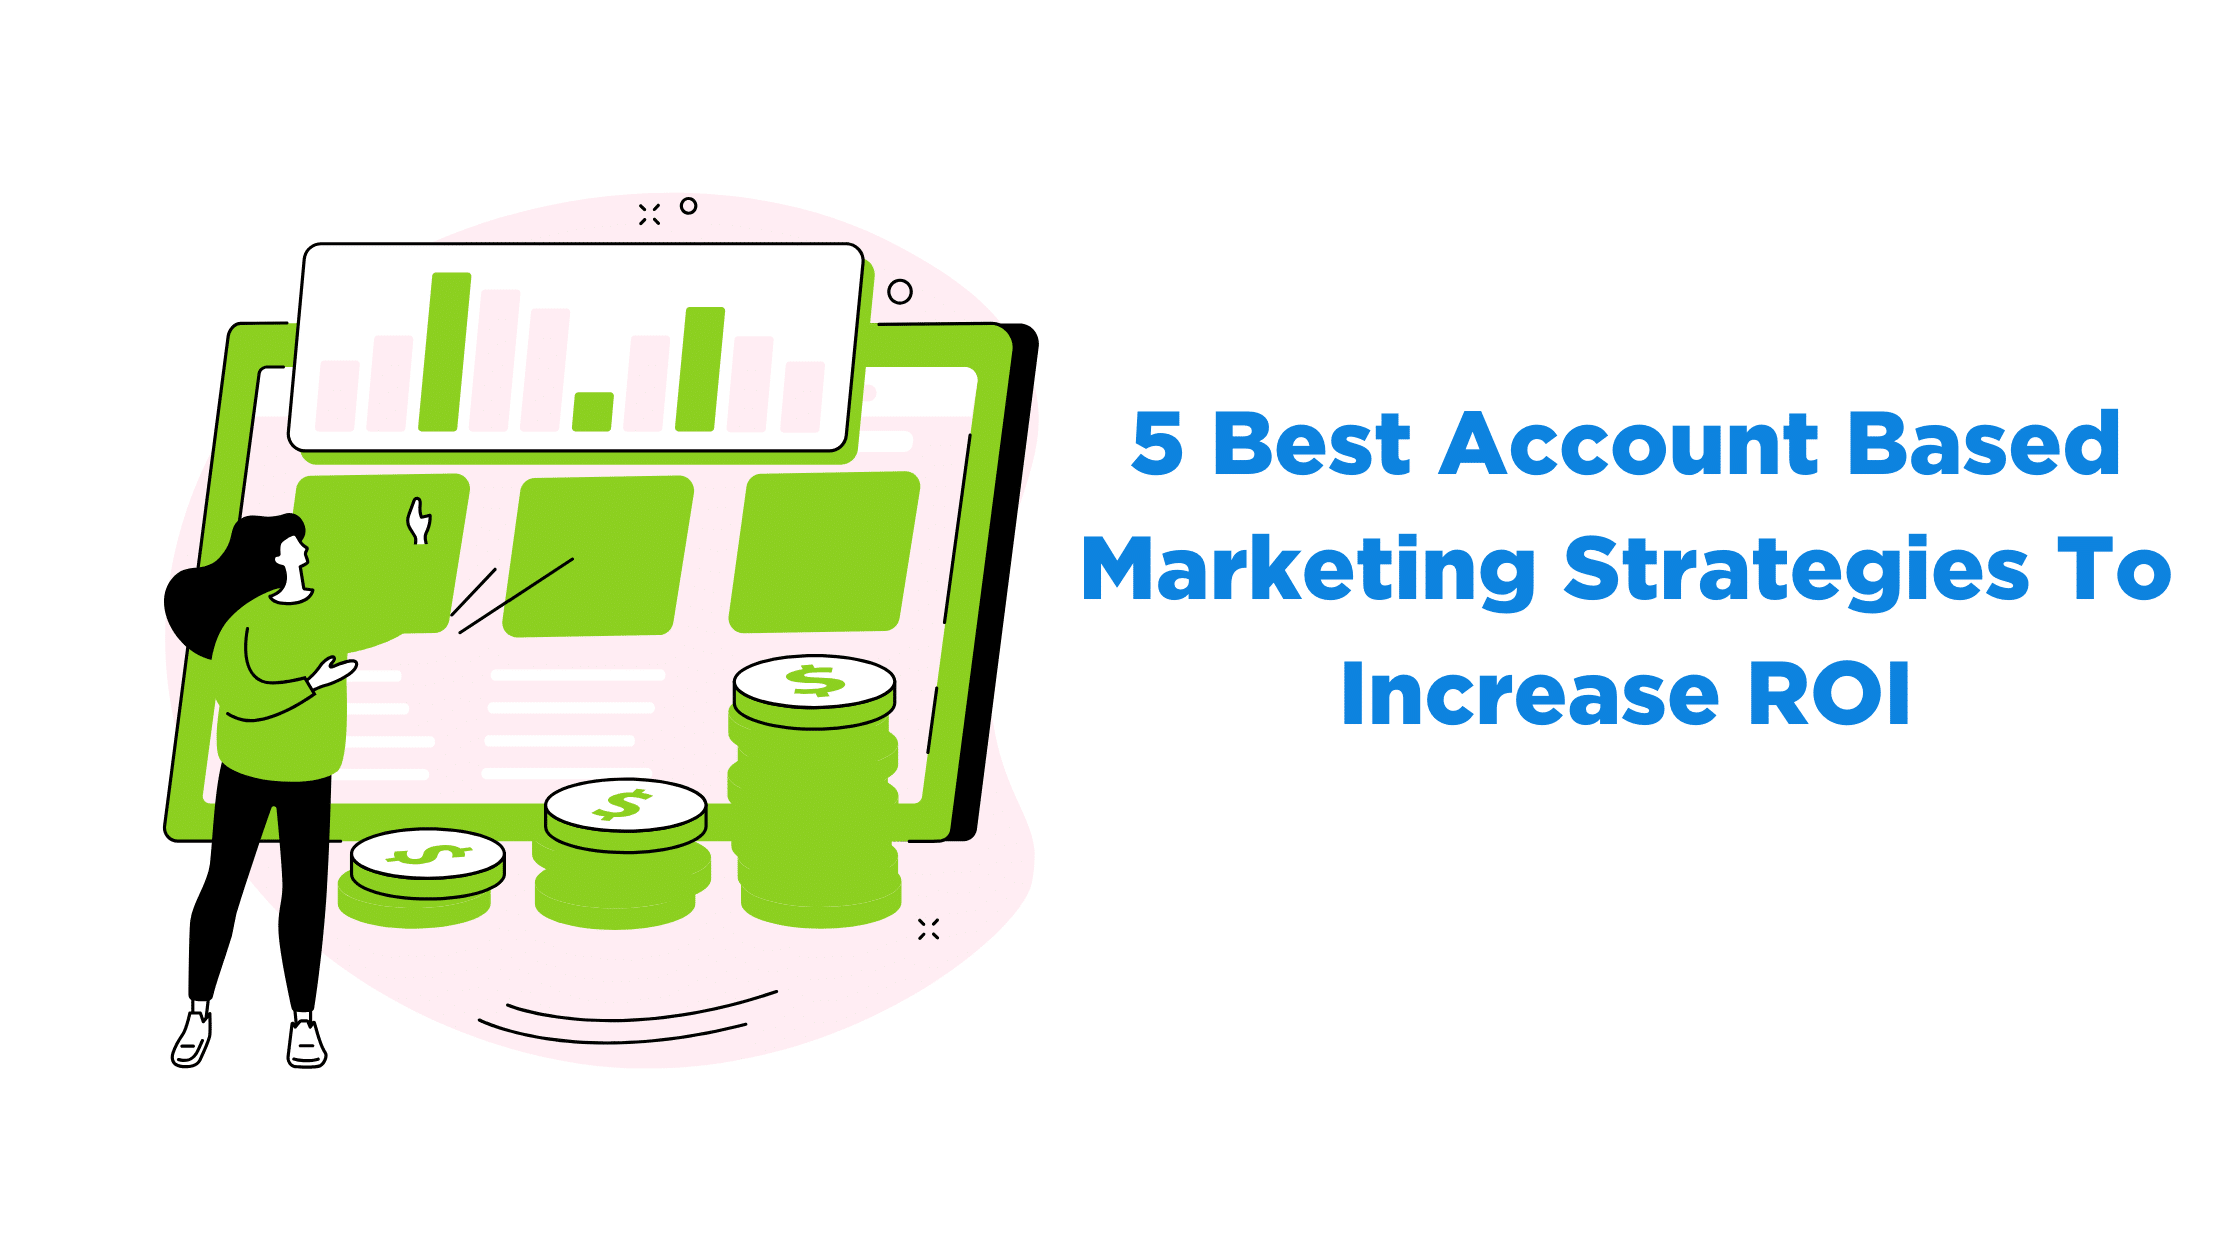 5 Best Account Based Marketing Strategies To Increase ROI